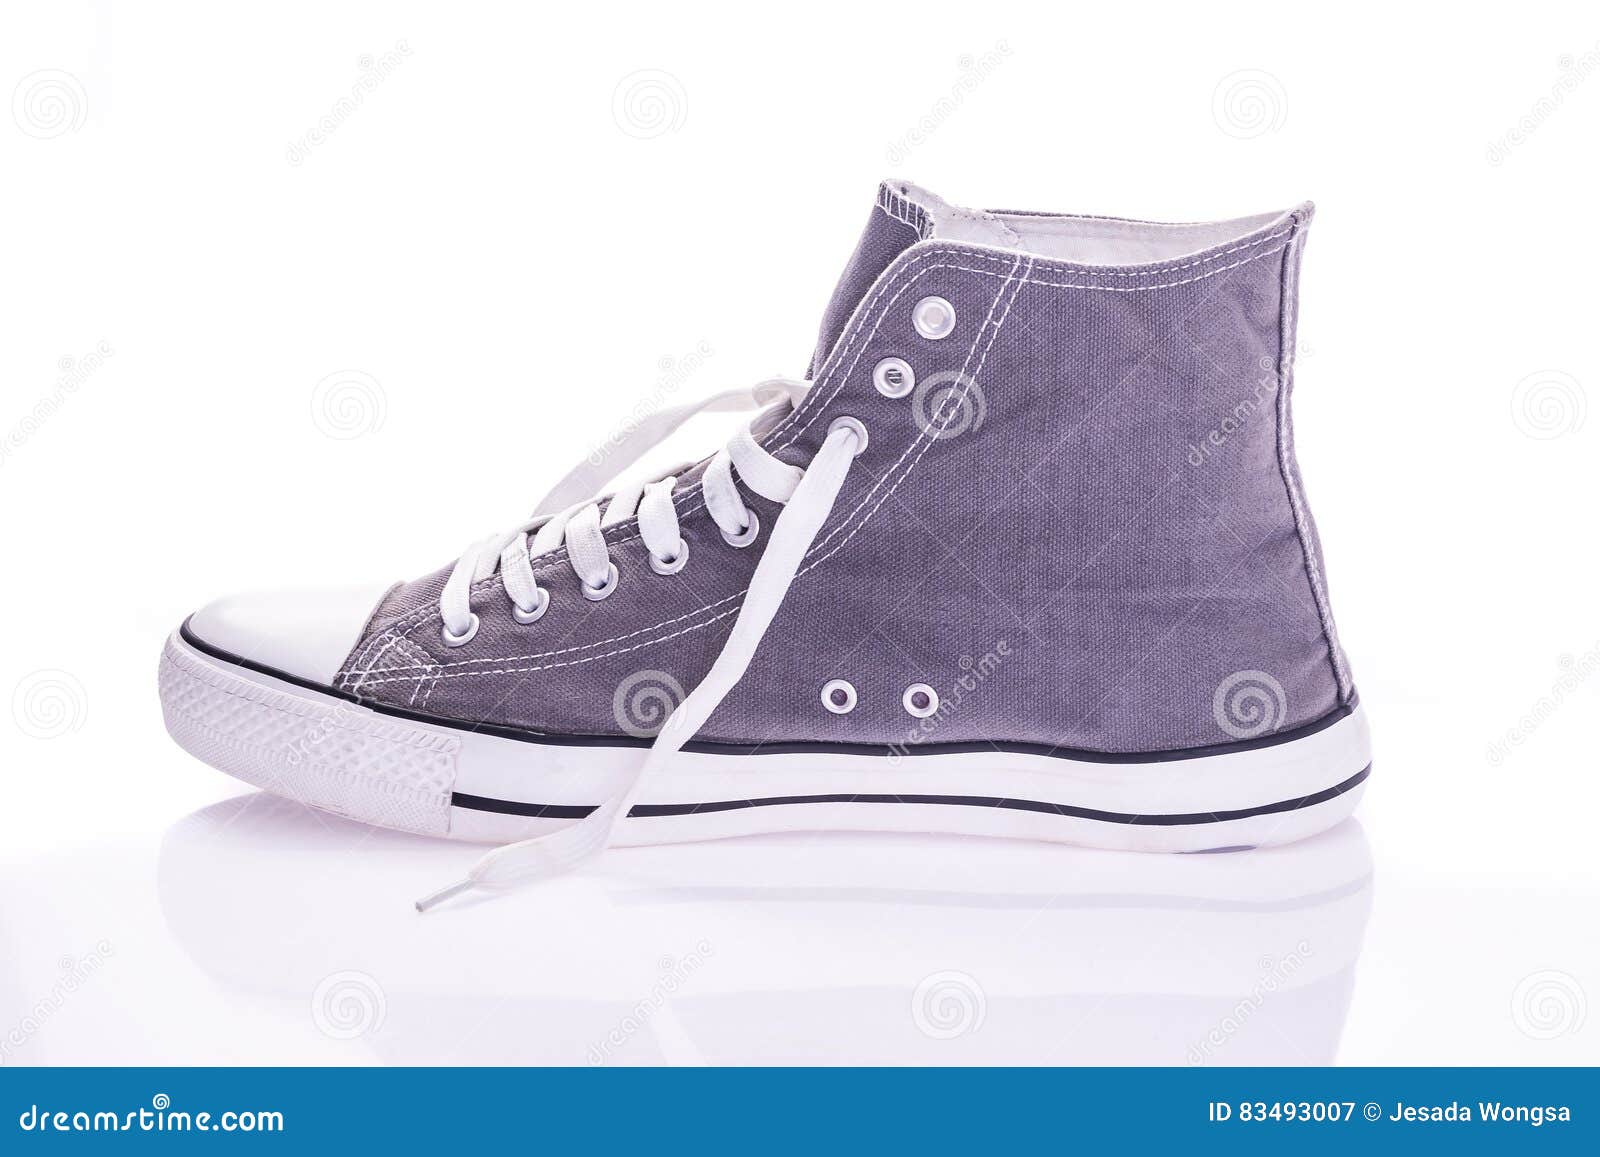 Single Canvas Sneaker Isolated on White Stock Image - Image of personal ...